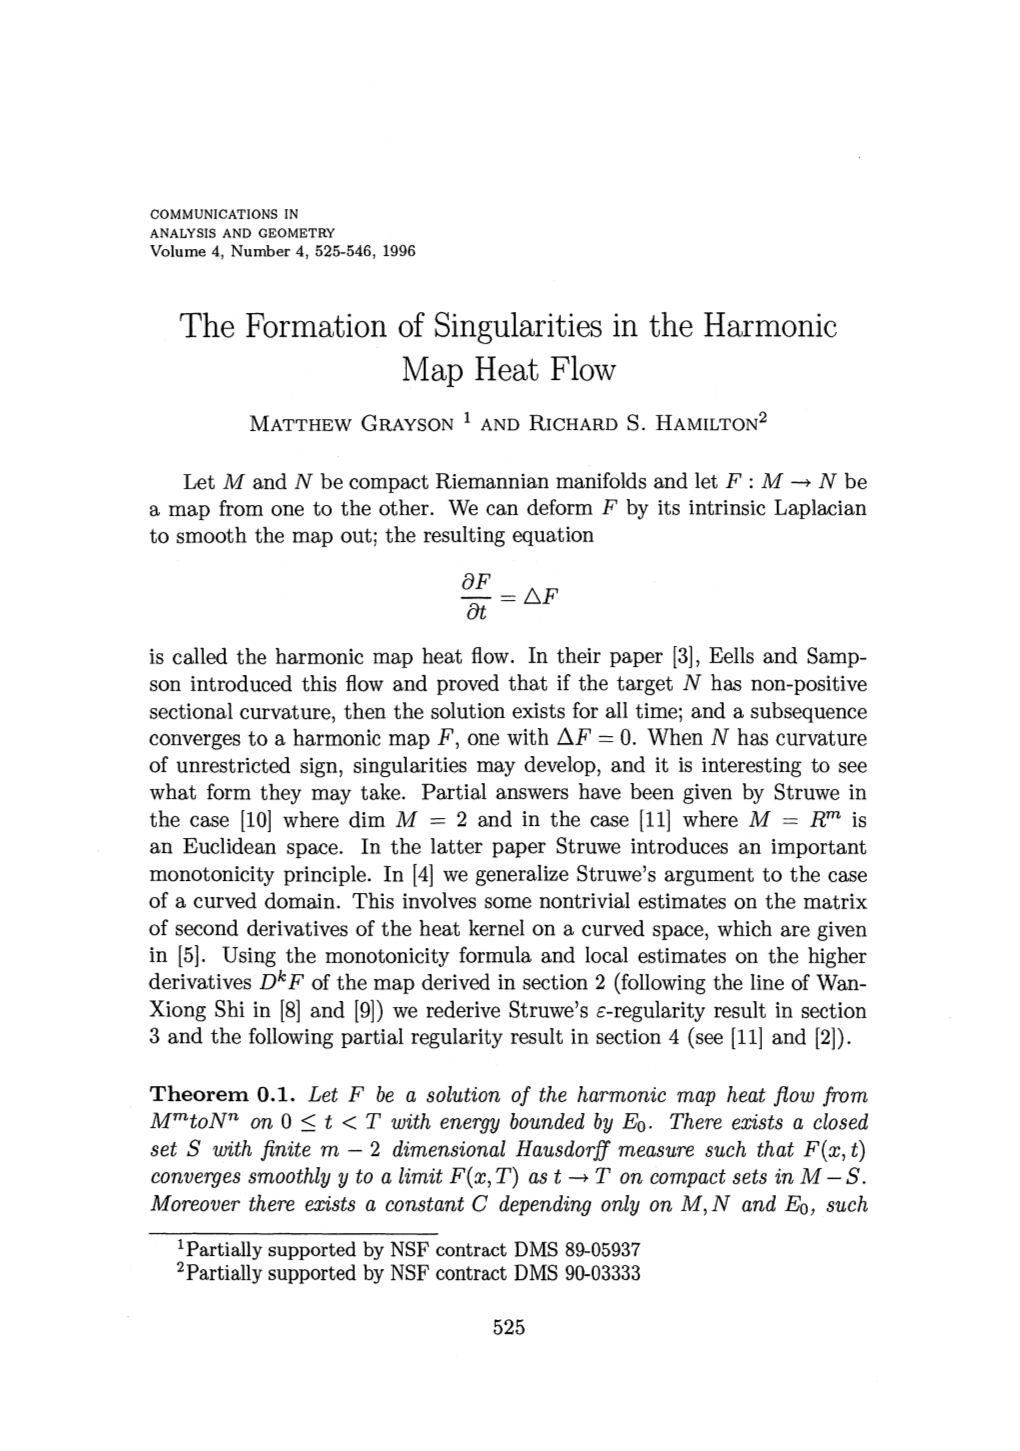 The Formation of Singularities in the Harmonic Map Heat Flow